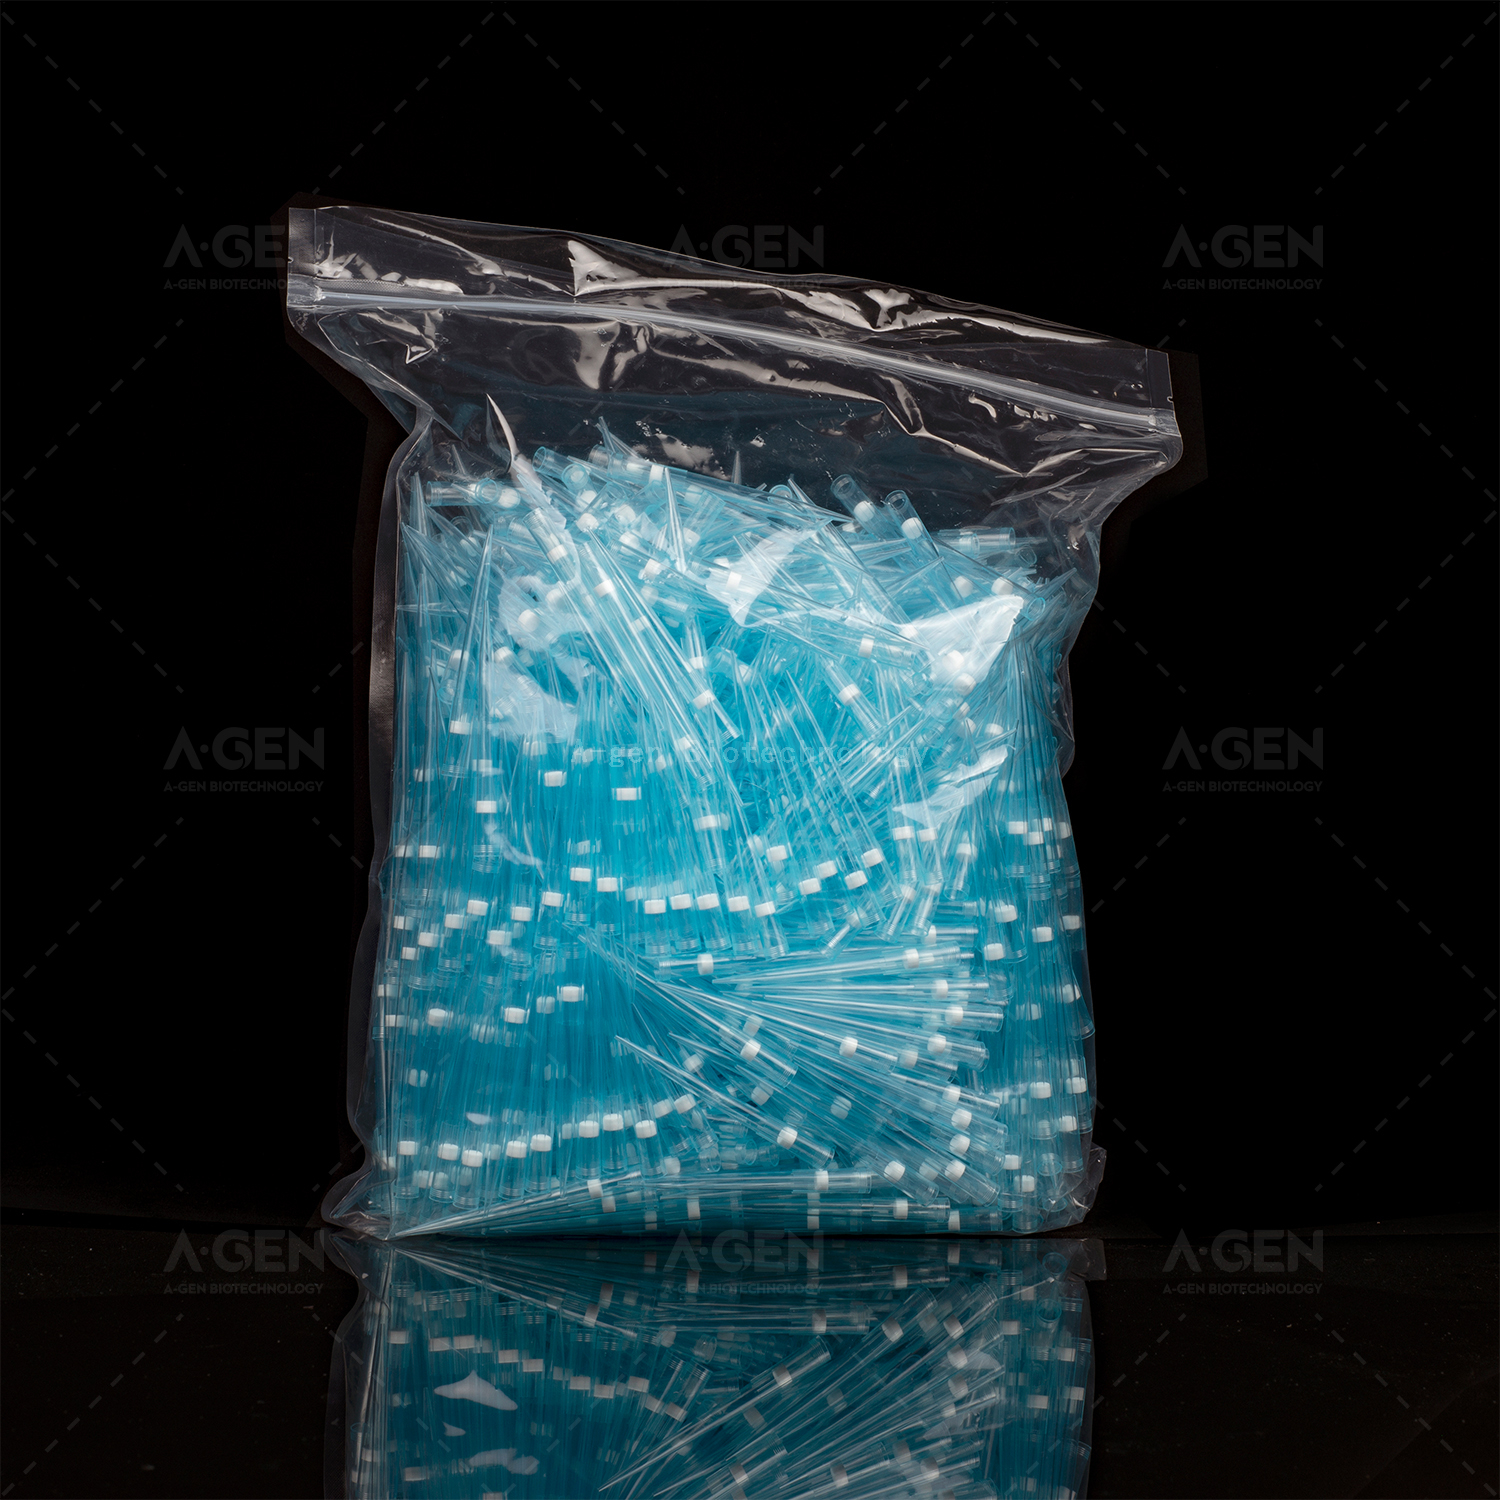 Non-filtered 1000μL Blue Transparent Pipette tips 